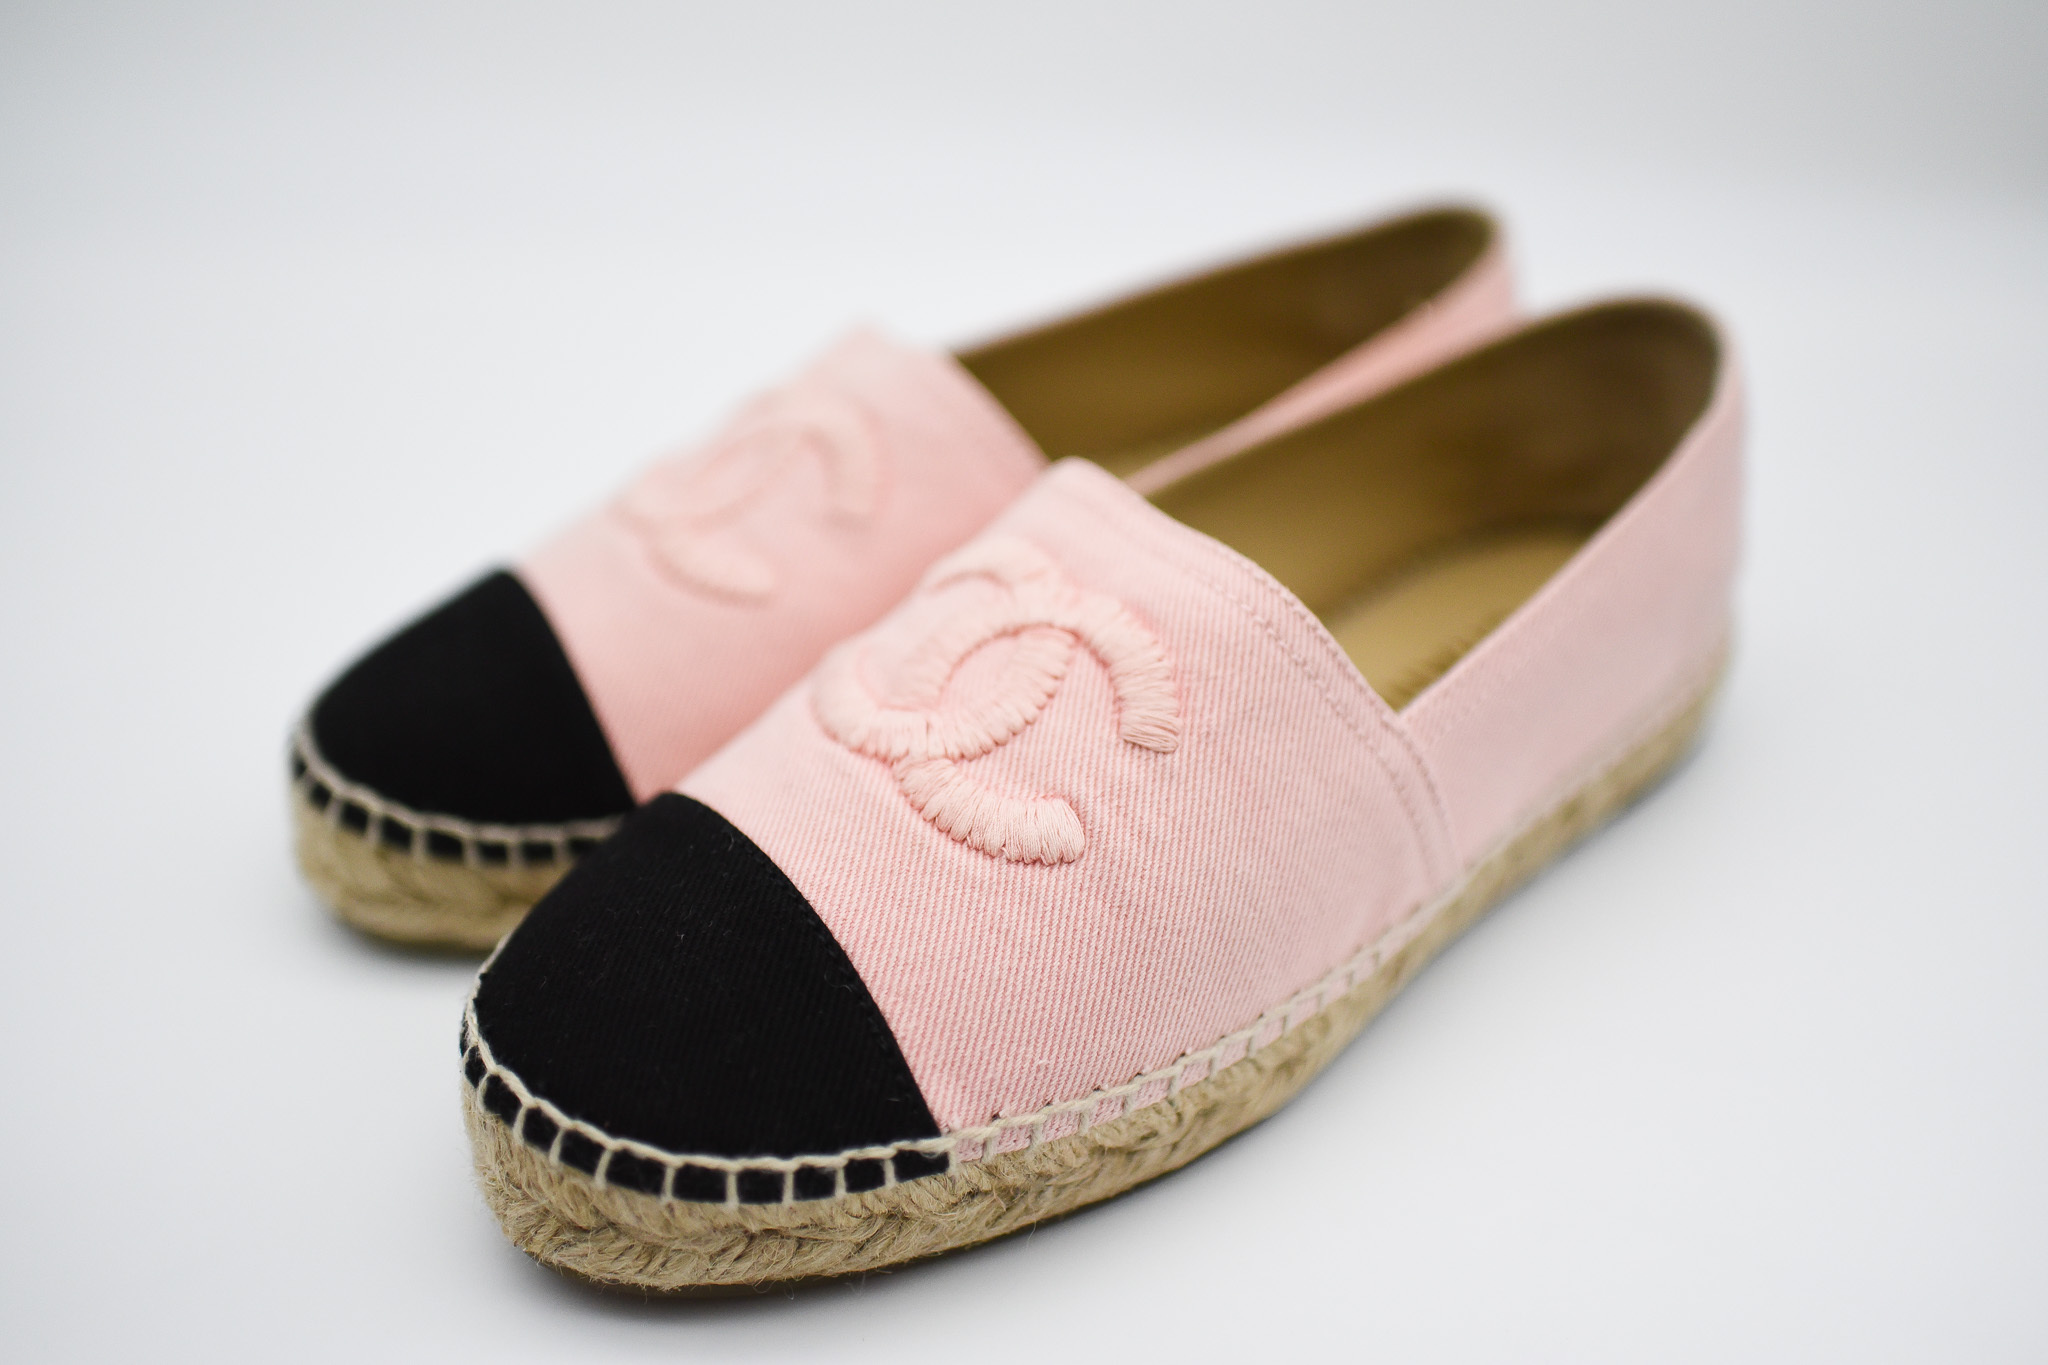 Chanel Espadrilles, Pink, Size 38, New in Box MA001 - Julia Rose